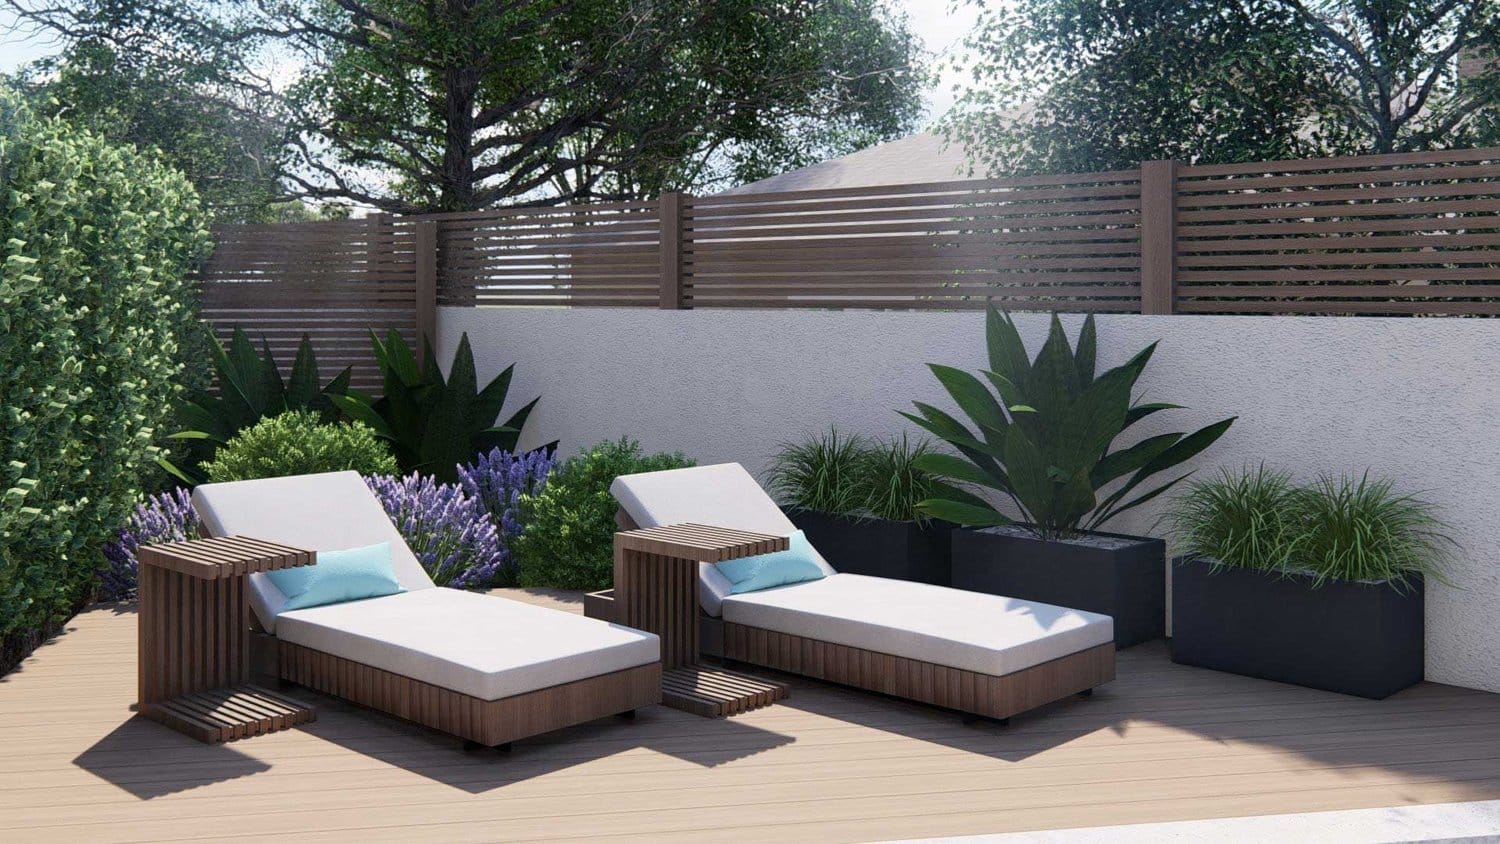 Los Angeles side yard with paver patio area alongside chaise lounge set, flowers, boxed plants and trees